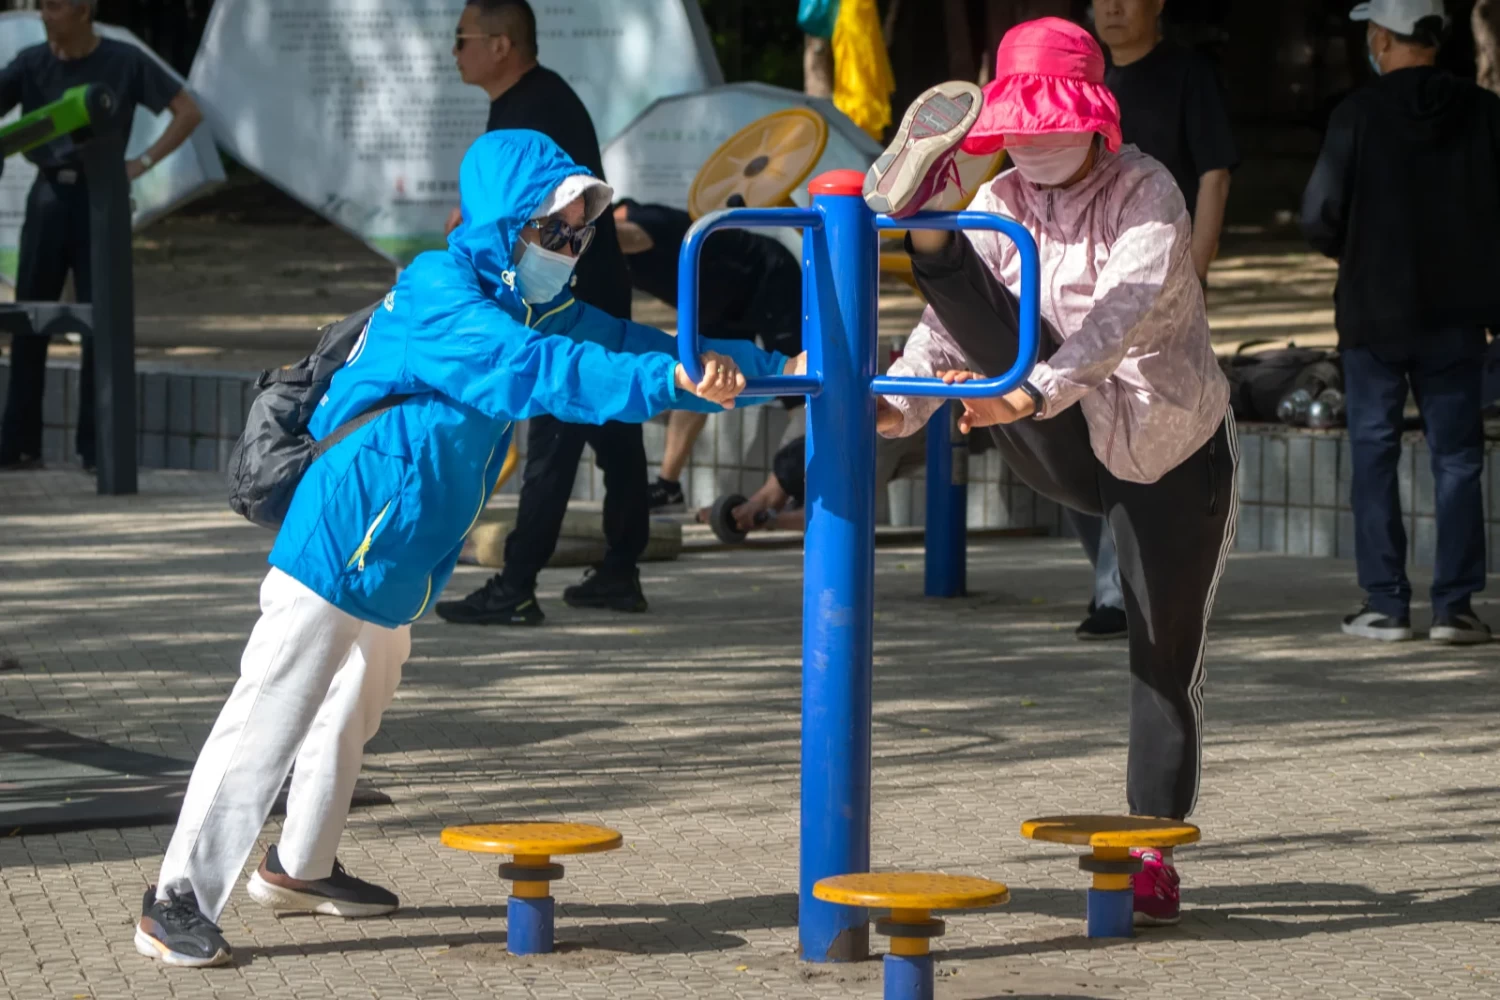 Women wearing face masks use exercise equipment at a public park in Beijing in May 2023. Mark Schiefelbein—AP Photo